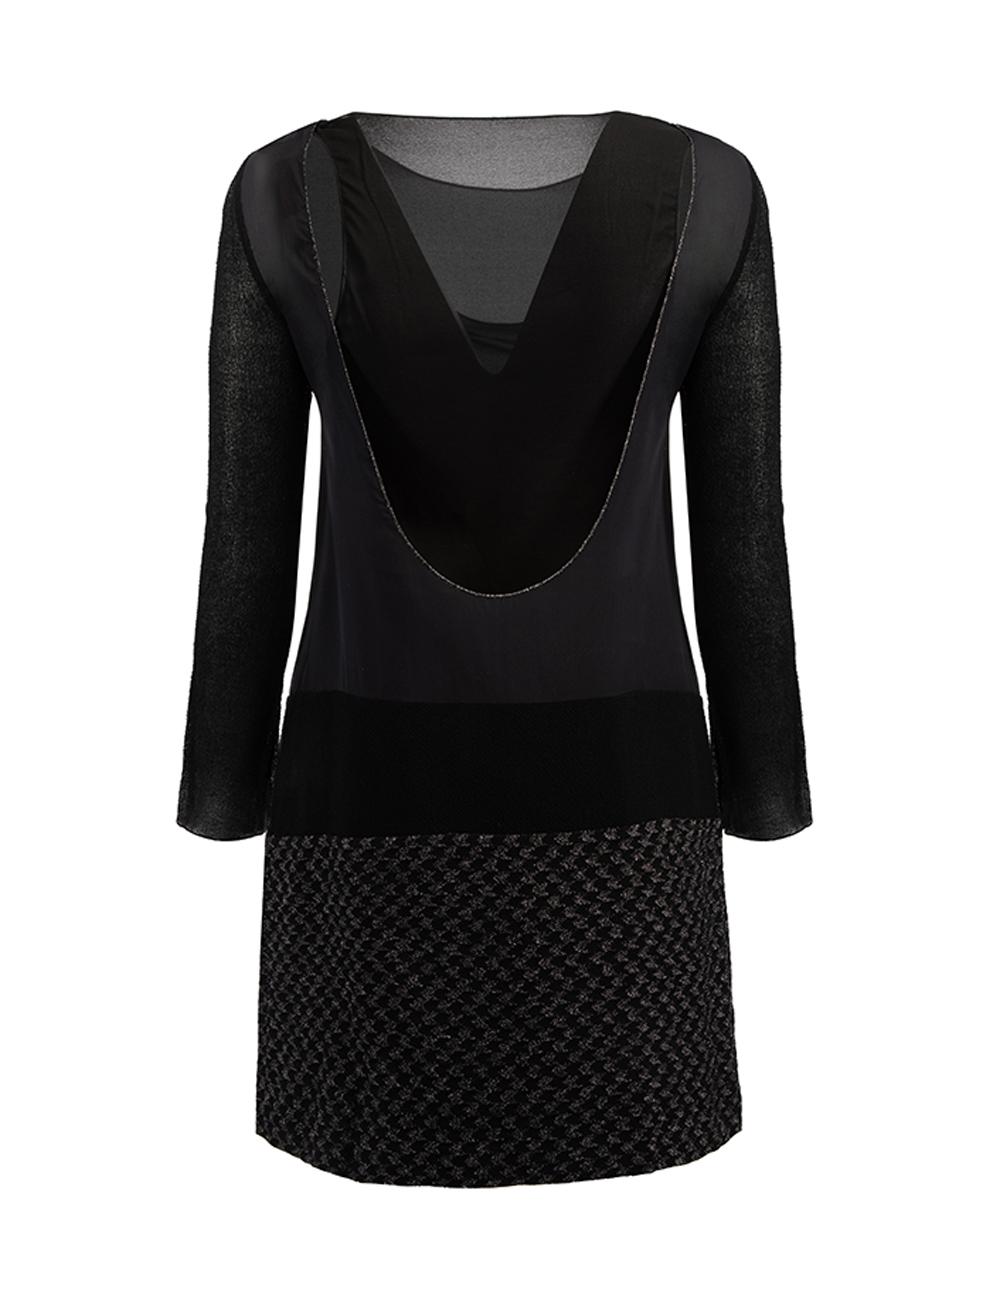 Missoni Women's Black Mesh Layered Houndstooth Panel Dress In Good Condition For Sale In London, GB